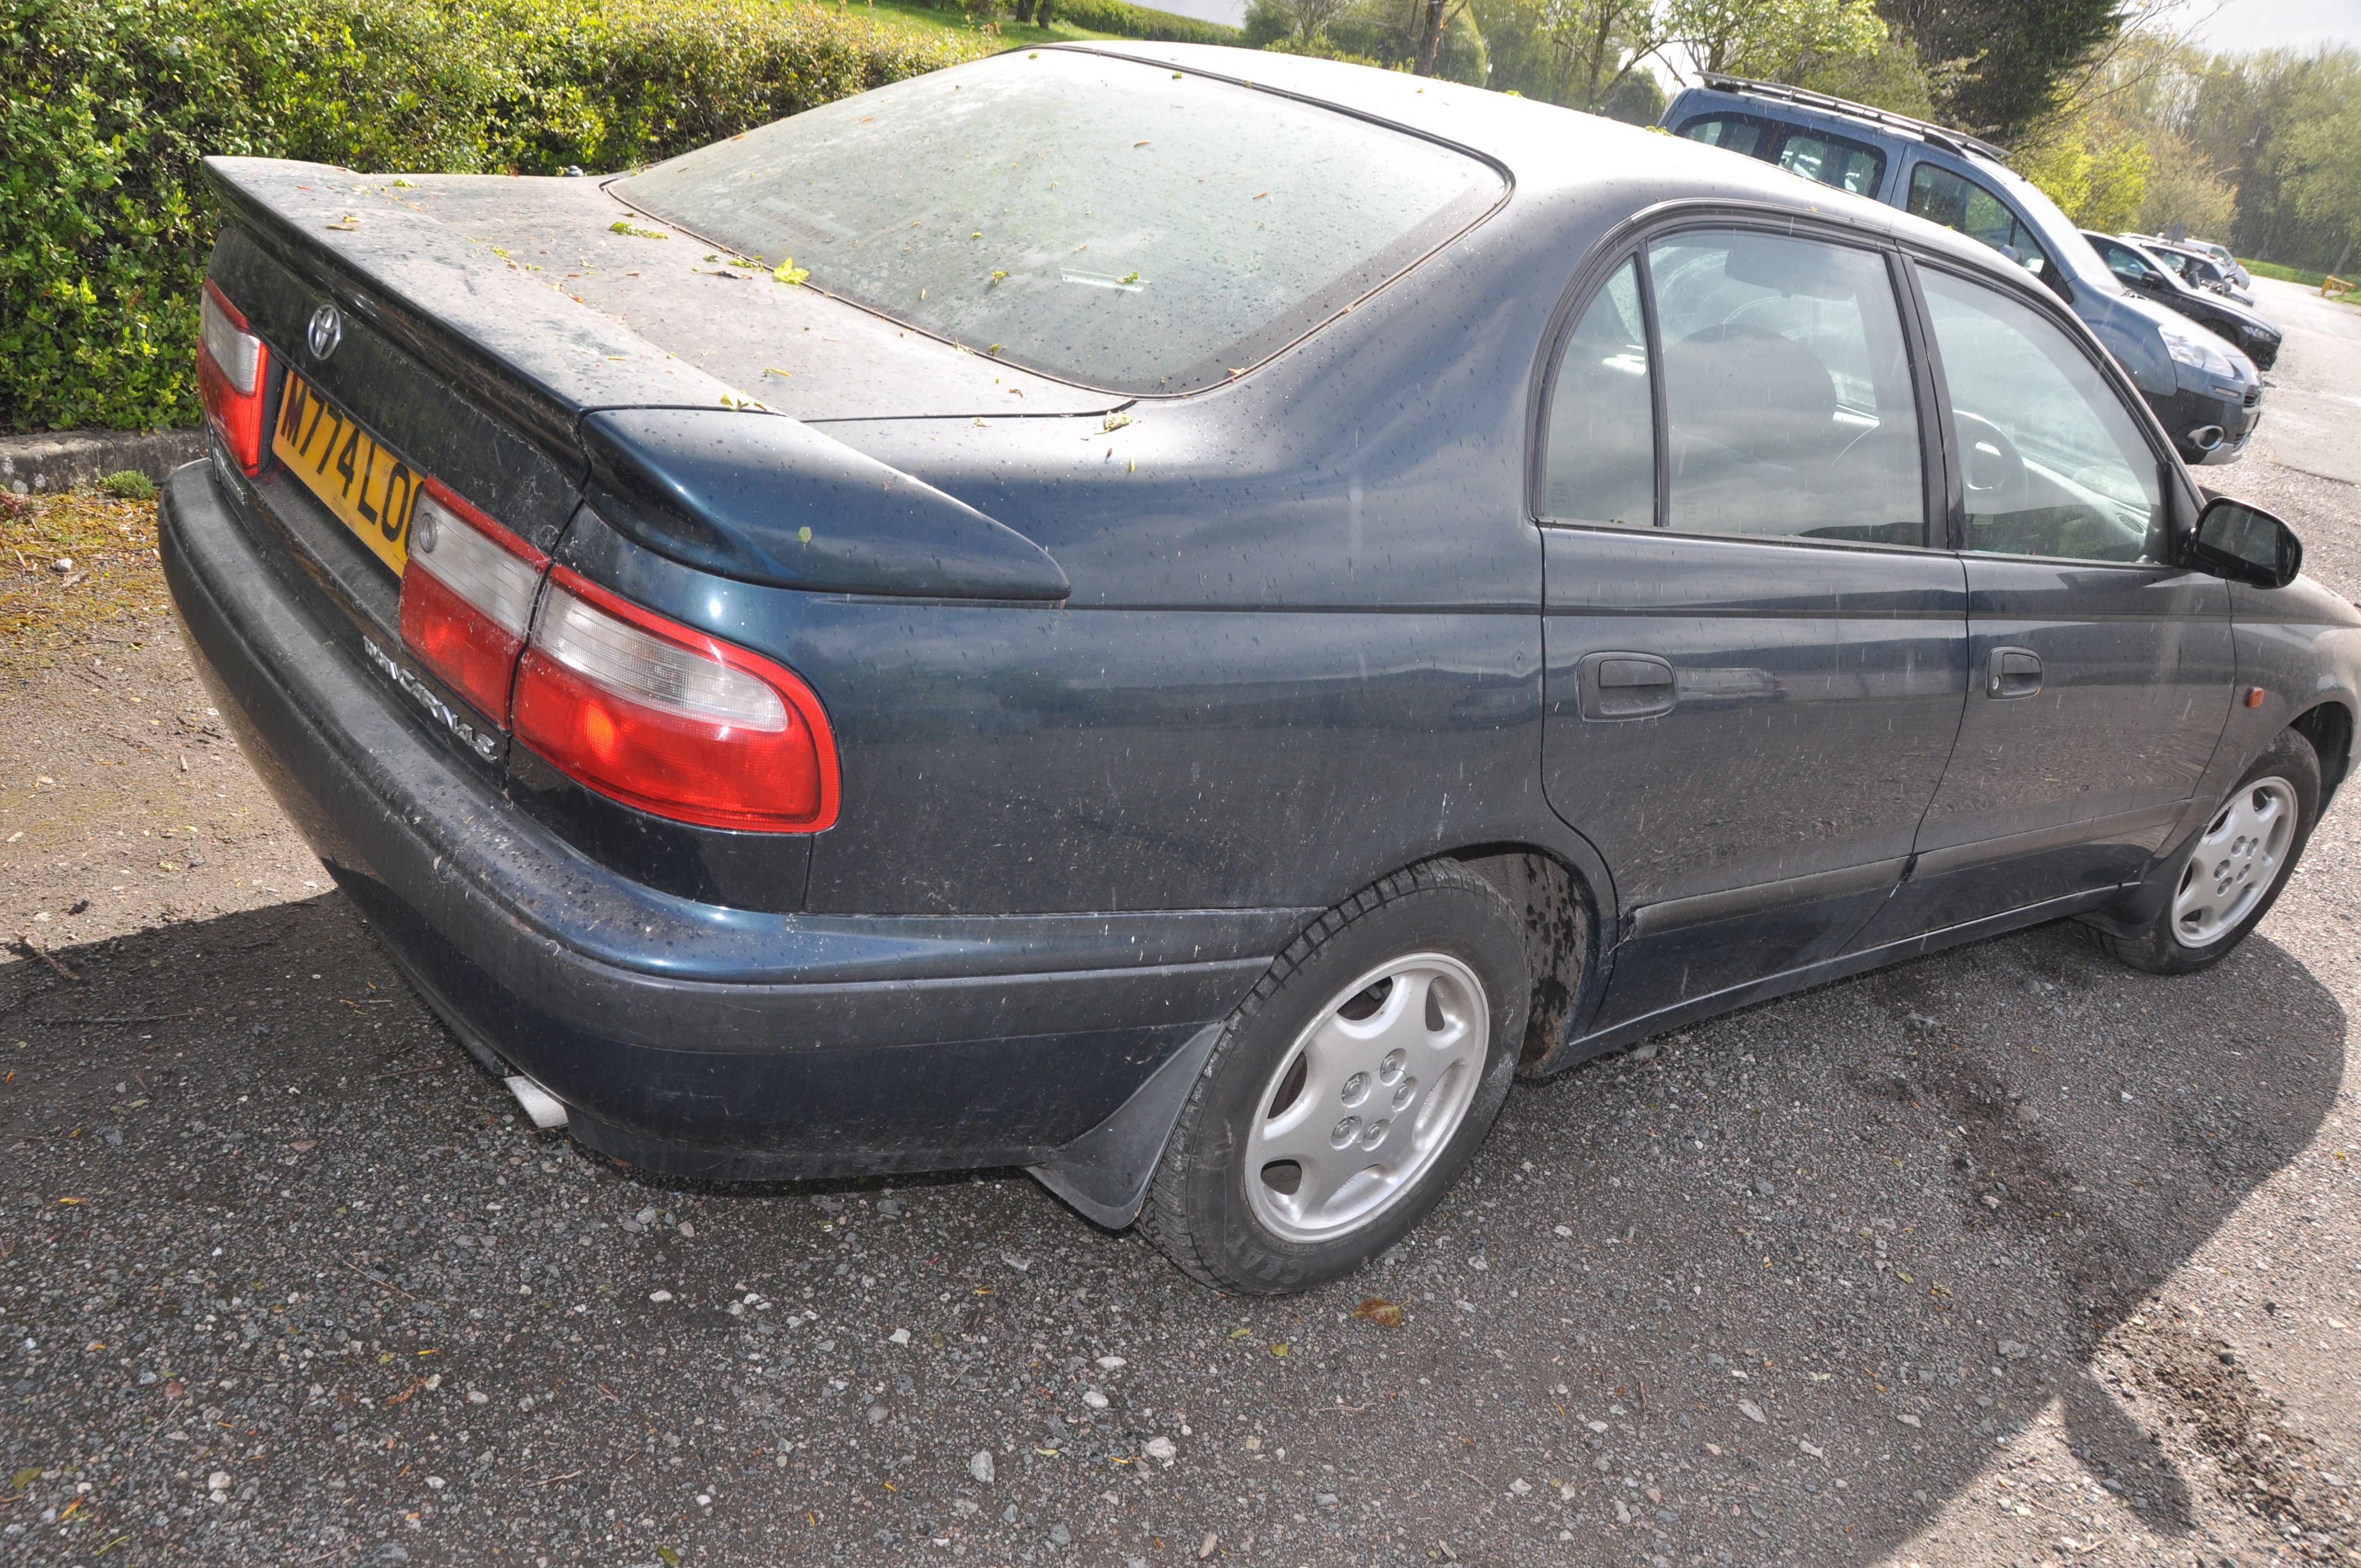 A 1994 TOYOTA CARINA E EXECUTIVE A FOUR DOOR SALOON CAR in blue, first registered 30/9/1994 under - Image 4 of 13